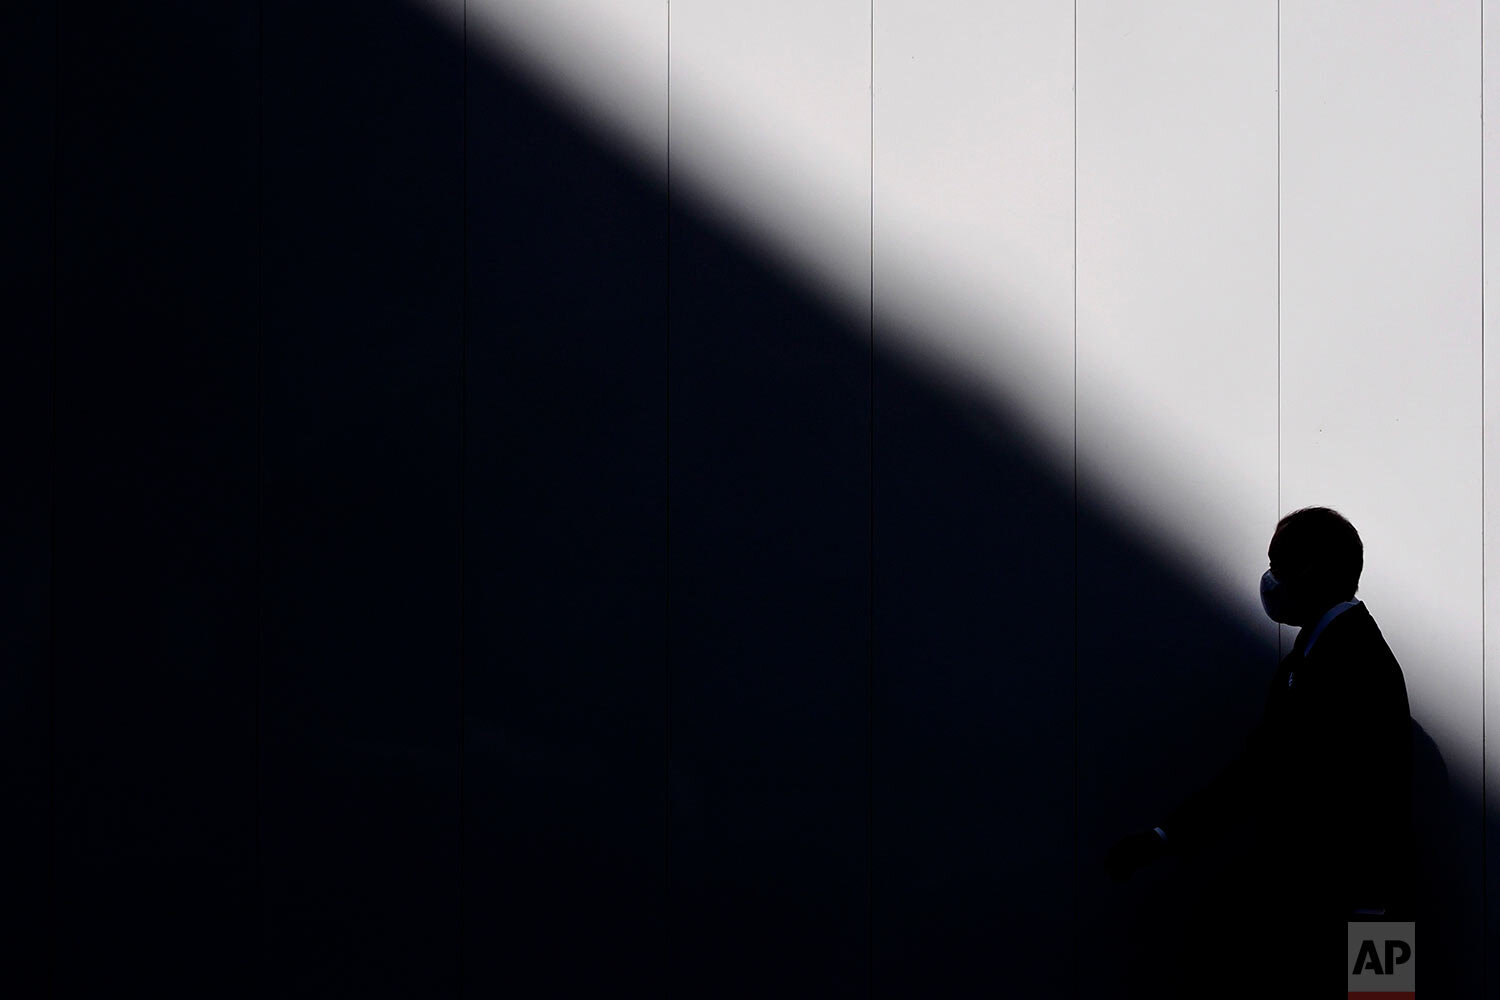  A man wearing a mask is silhouetted against a wall as he walks into the shade of a building Thursday, March 26, 2020, in Tokyo. (AP Photo/Jae C. Hong) 